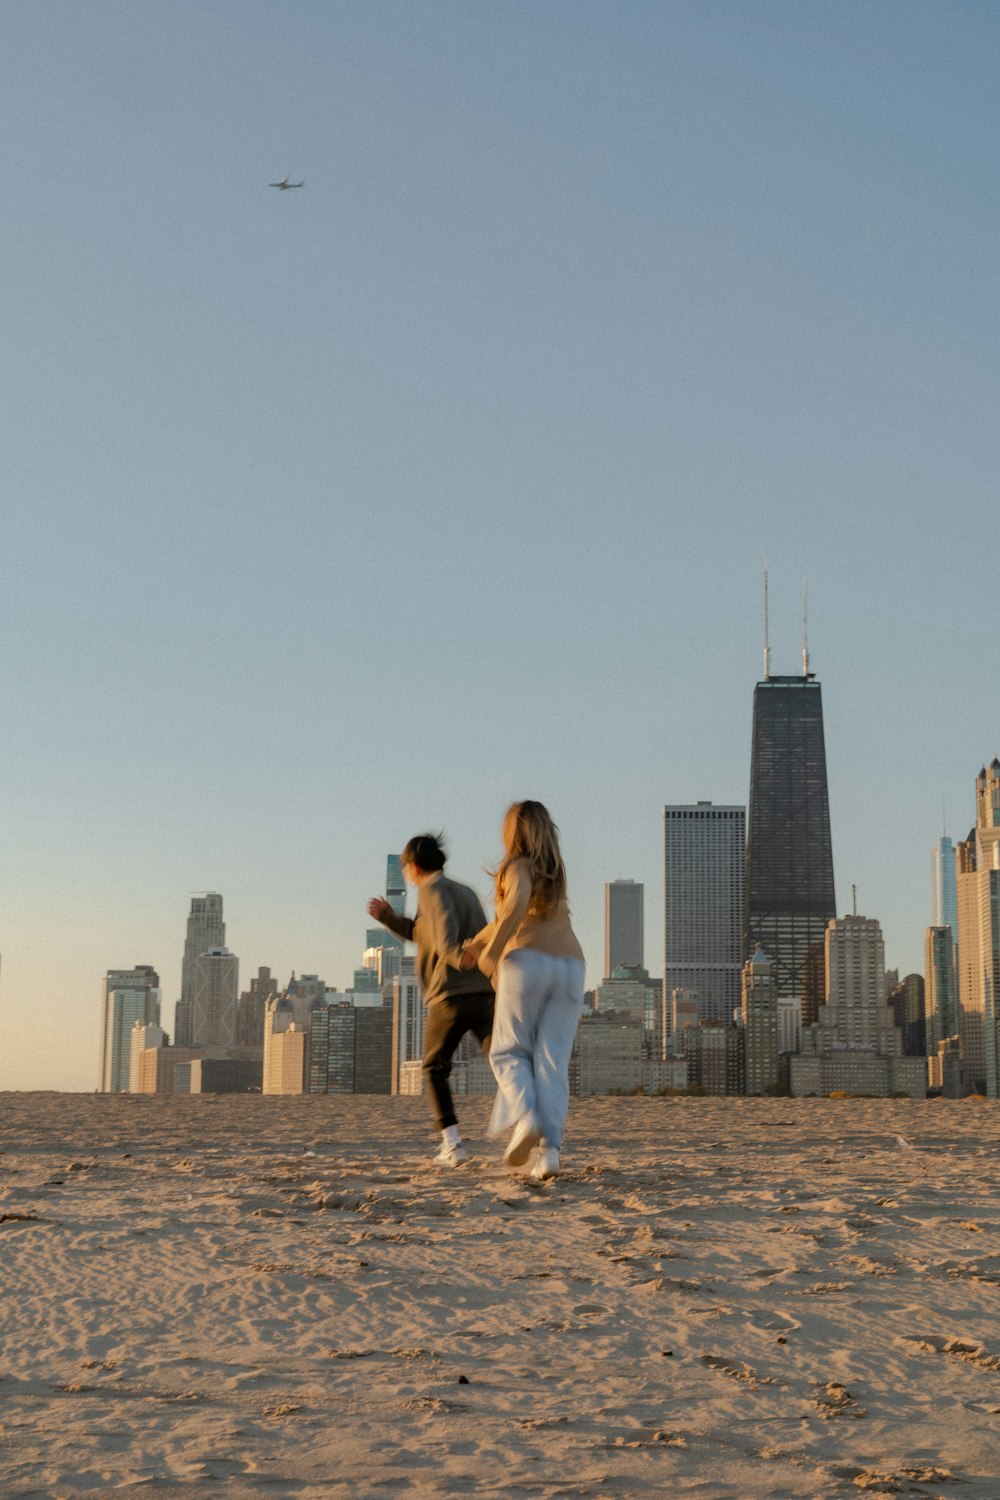 a man and woman holding hands on a beach with a city skyline in the background